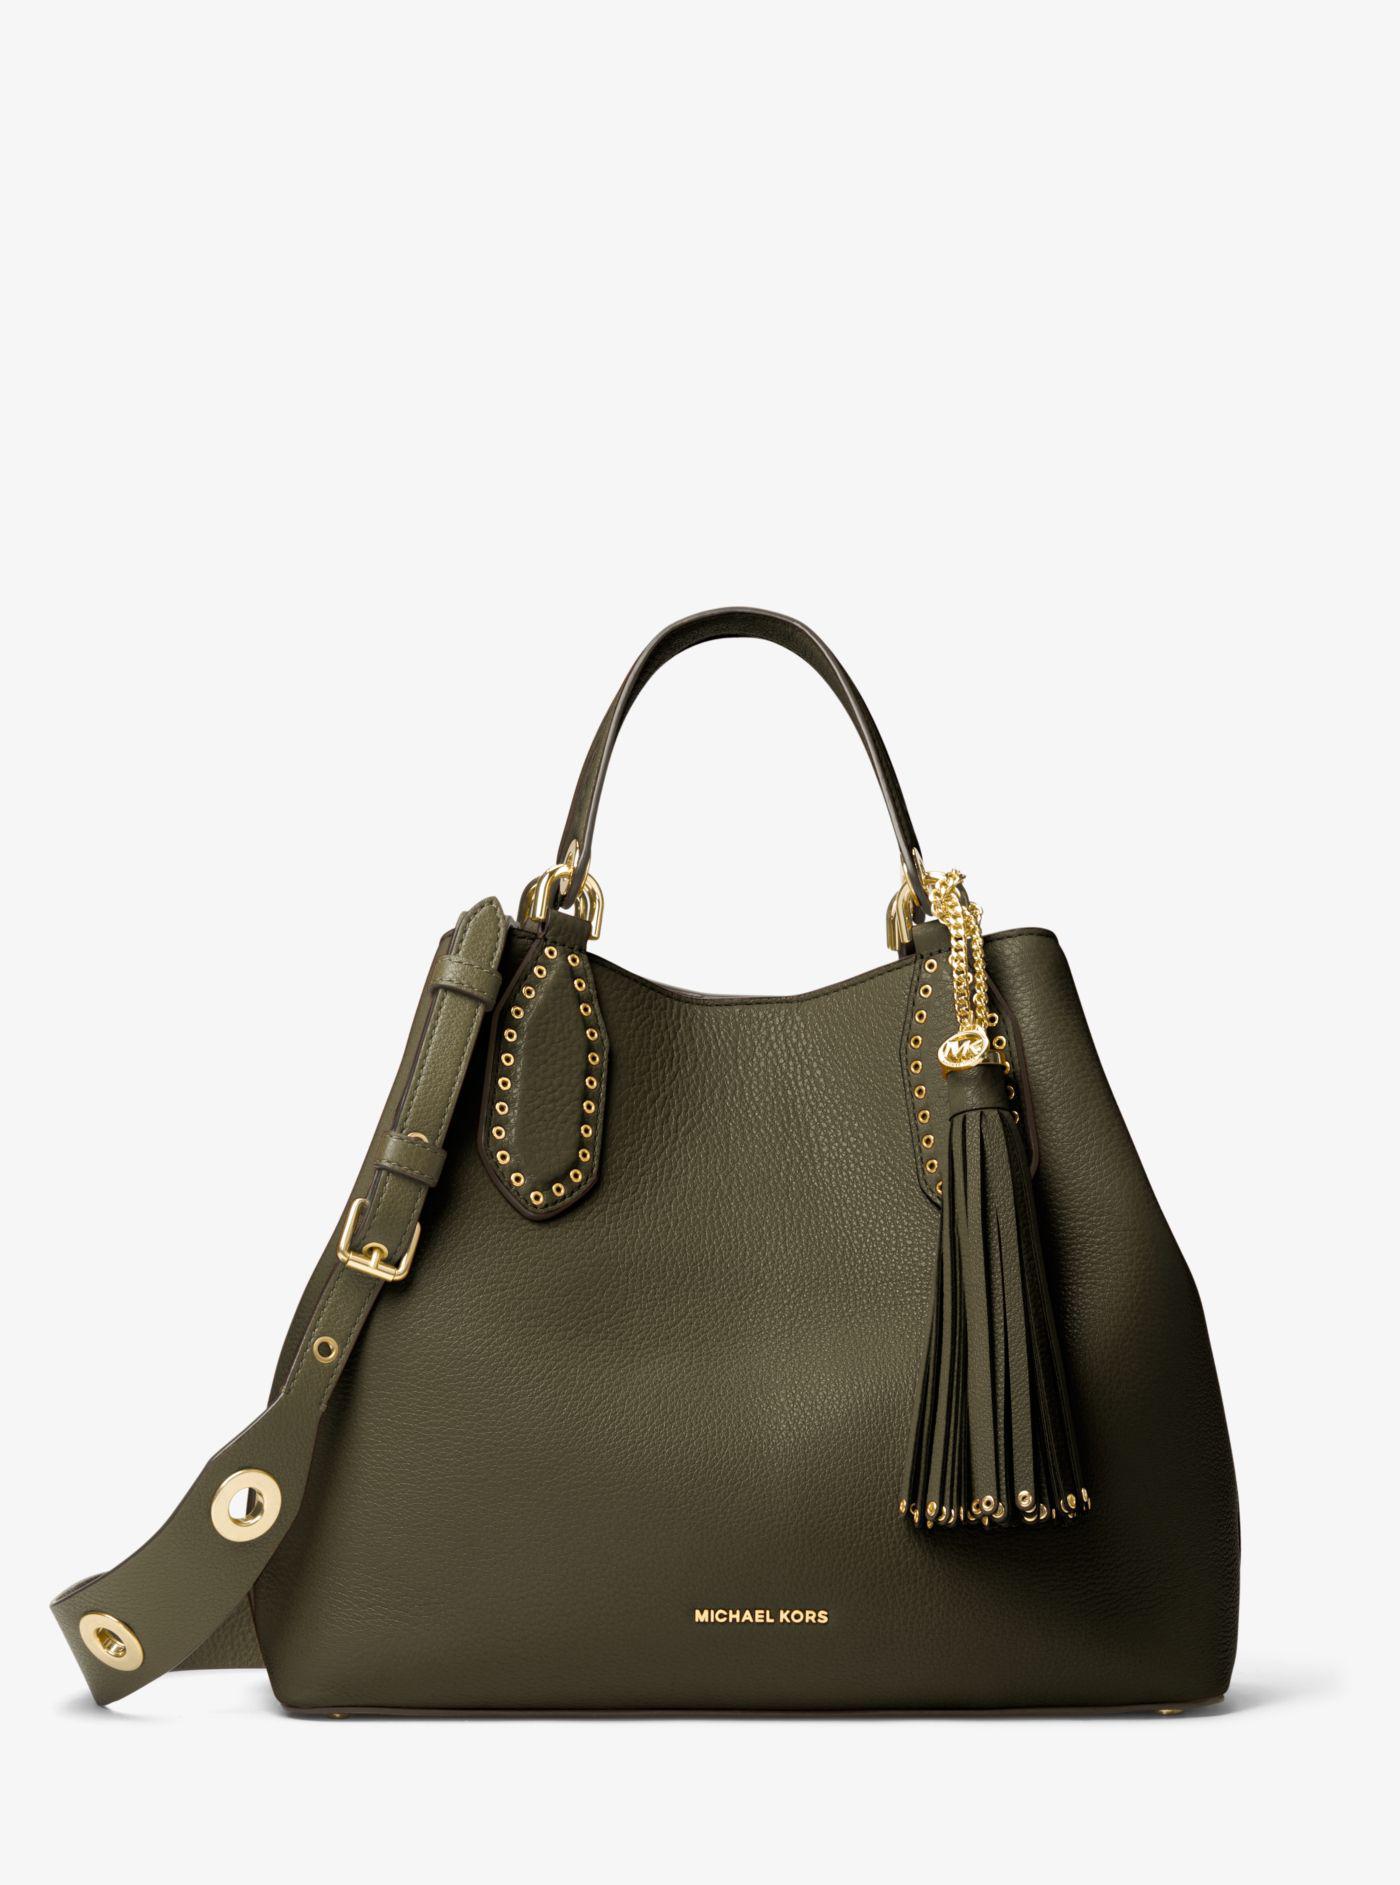 Luxury Designer Army Green Frosted Shoulder Bag Top Tier Y Saddle Shape  Crossbody Purse For Women, Vintage Style Saddle Bag With Underarm Purge  Compact Size From Hepodhgate, $293.37 | DHgate.Com